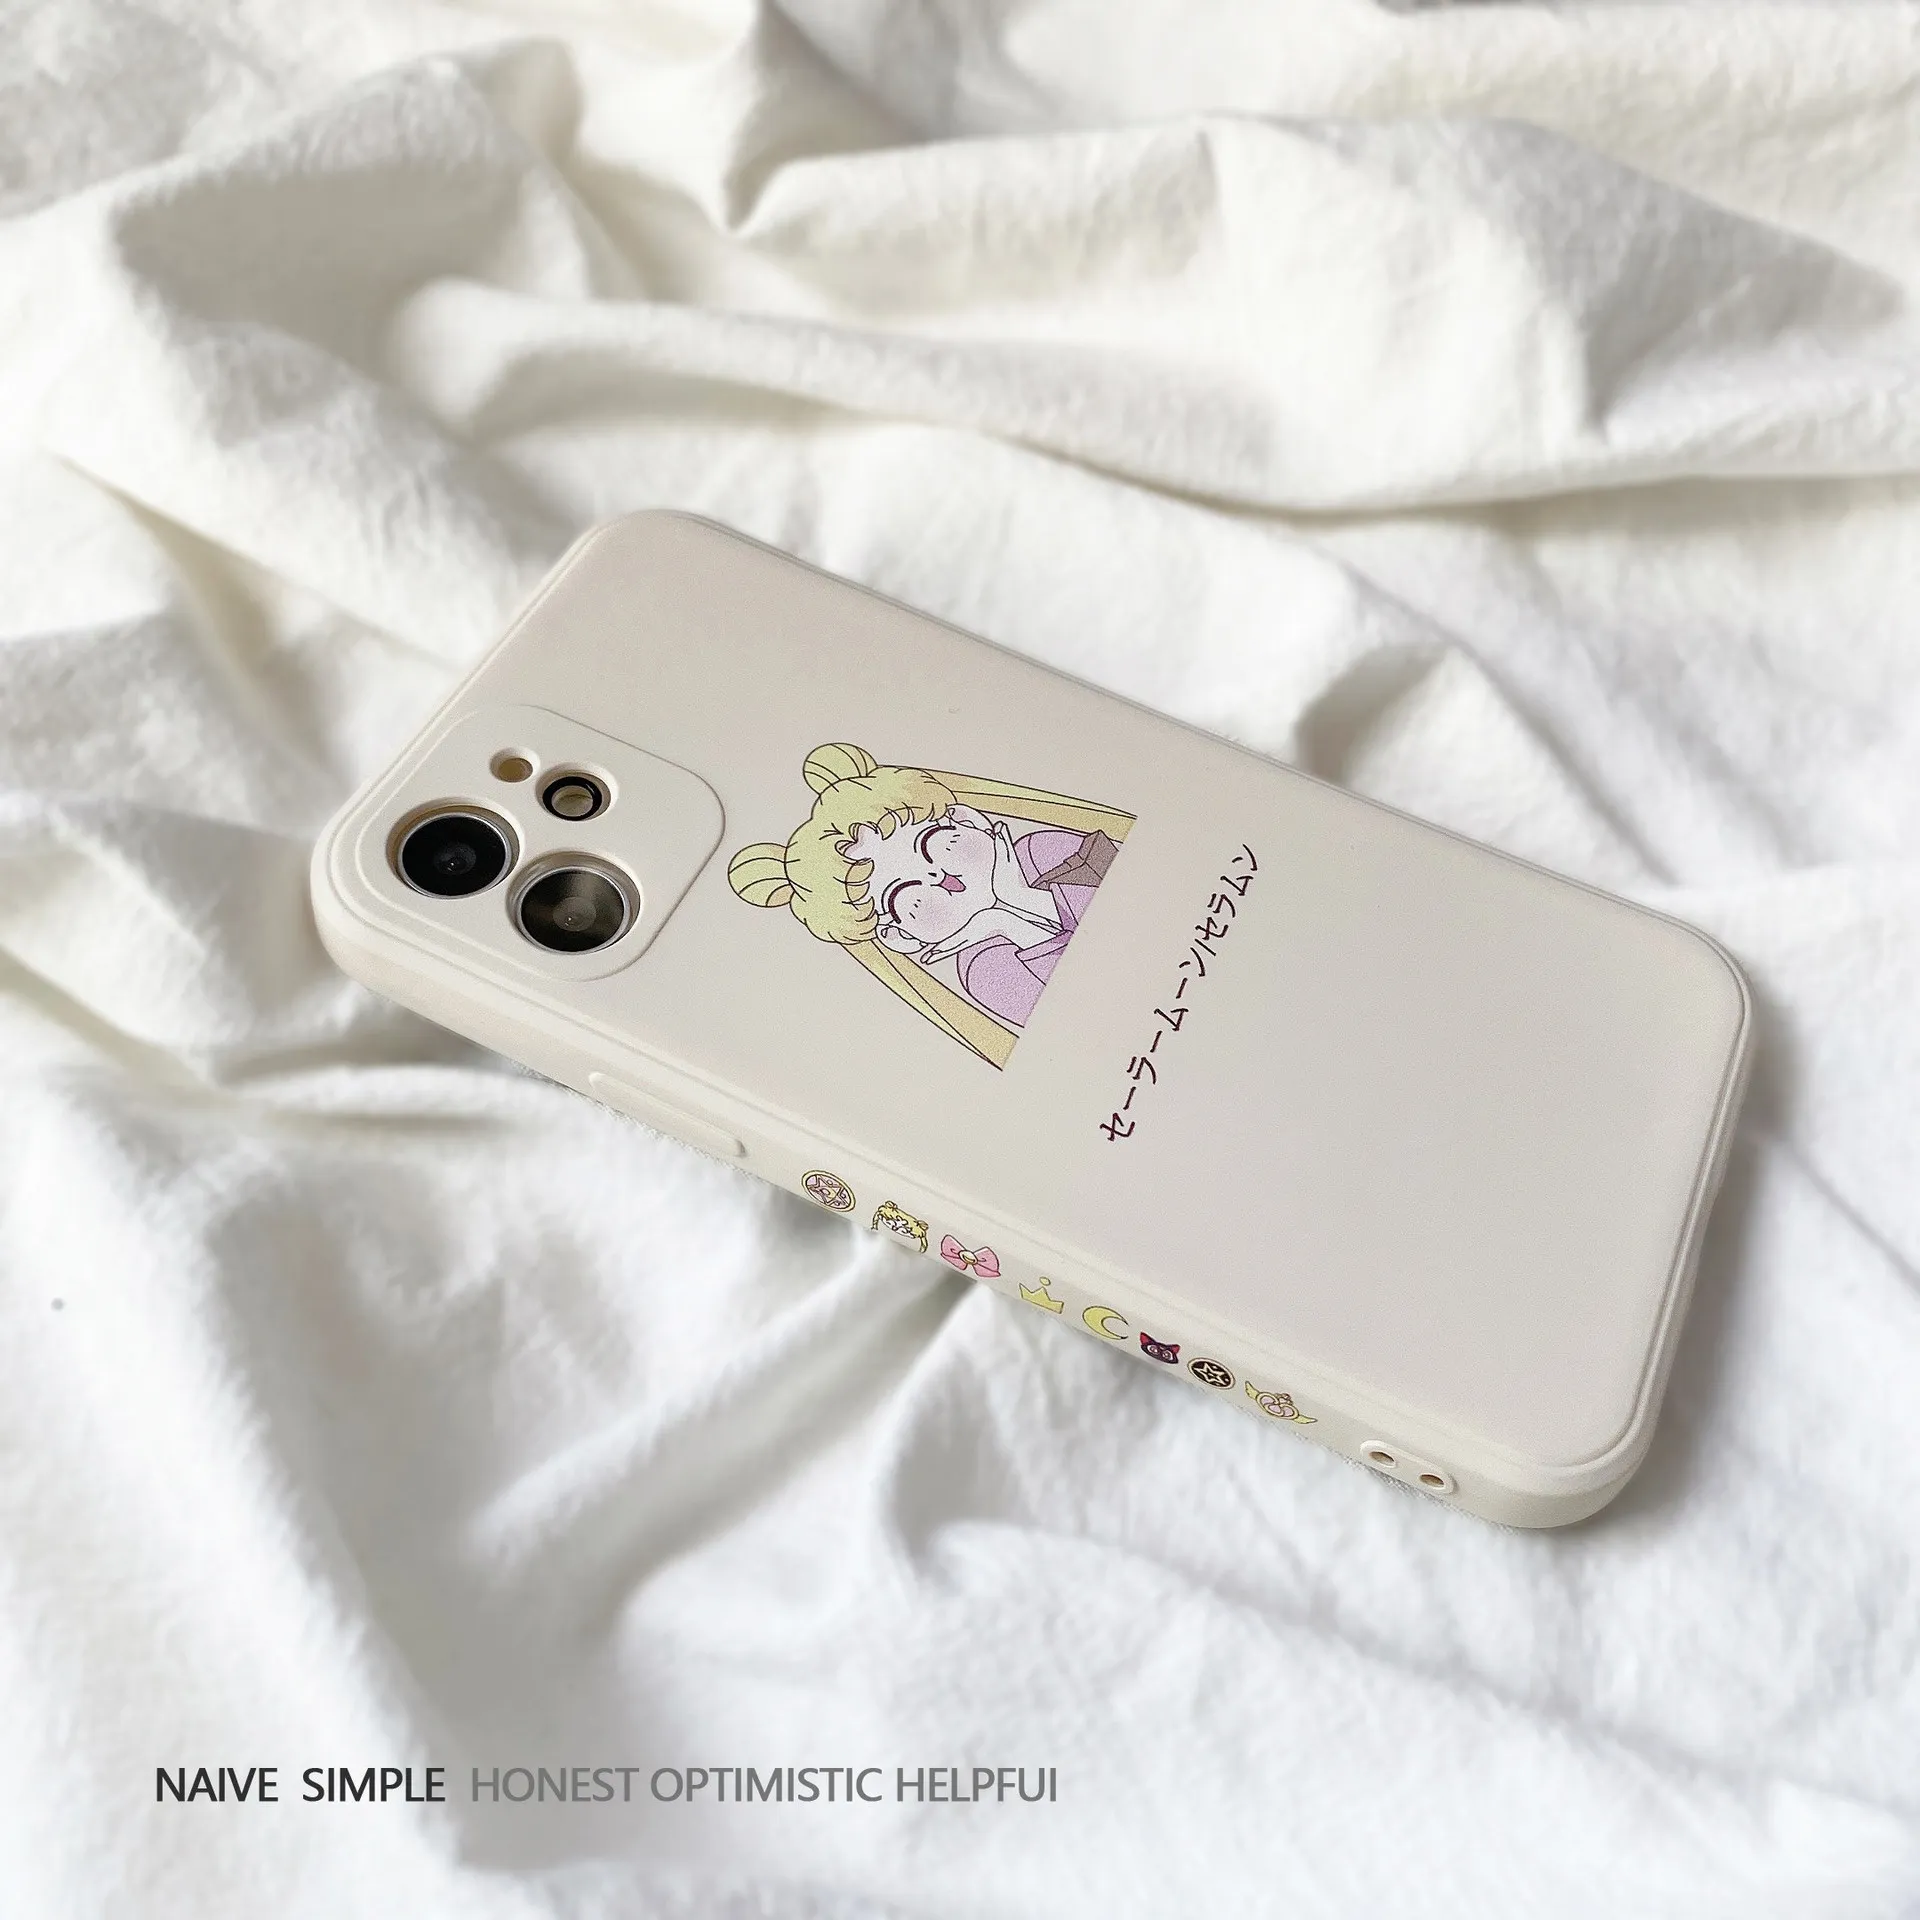 

The Side of the Little Monster Phone Case 8plus Applicable IPhone12 Cartoon 11pro Max, iPhone Xs Liquid Silicone 11 iphone case